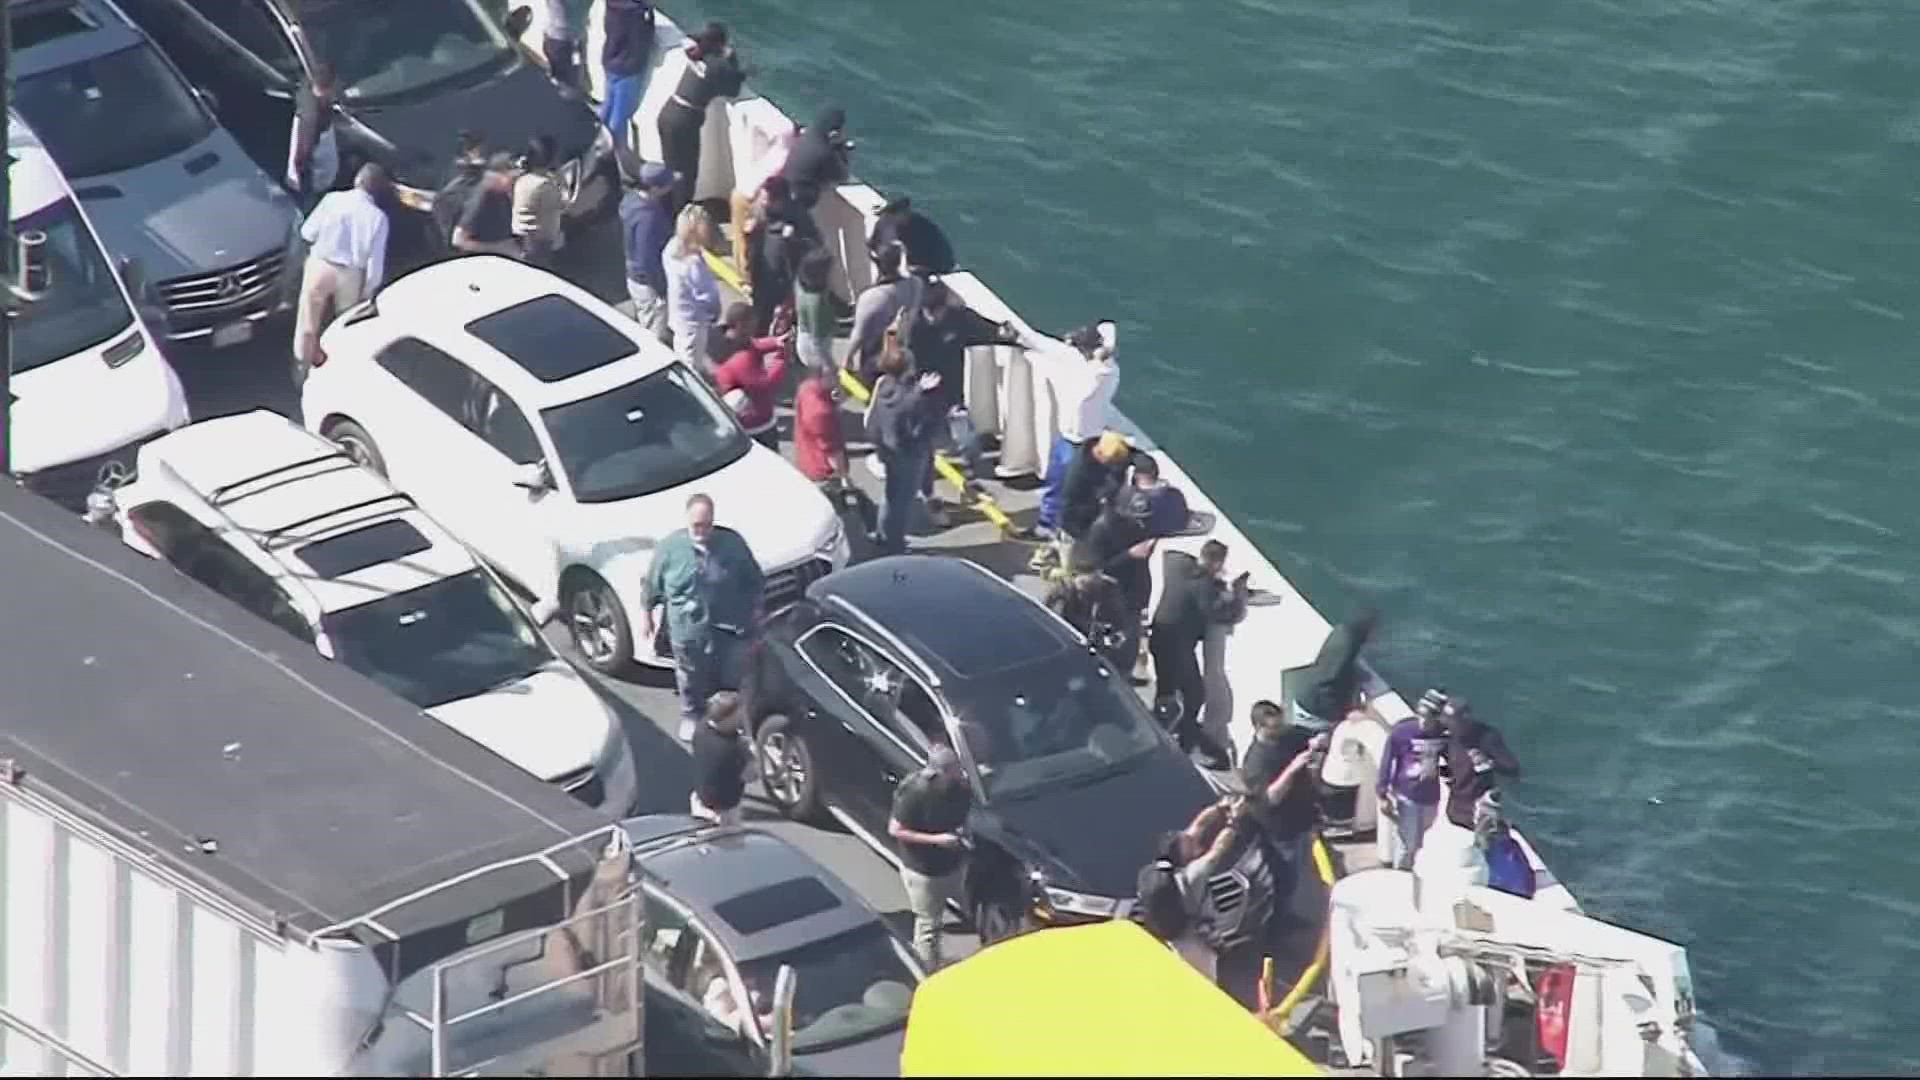 Nearly 50 people were transported today on a ferry to a military base in Cape Cod.